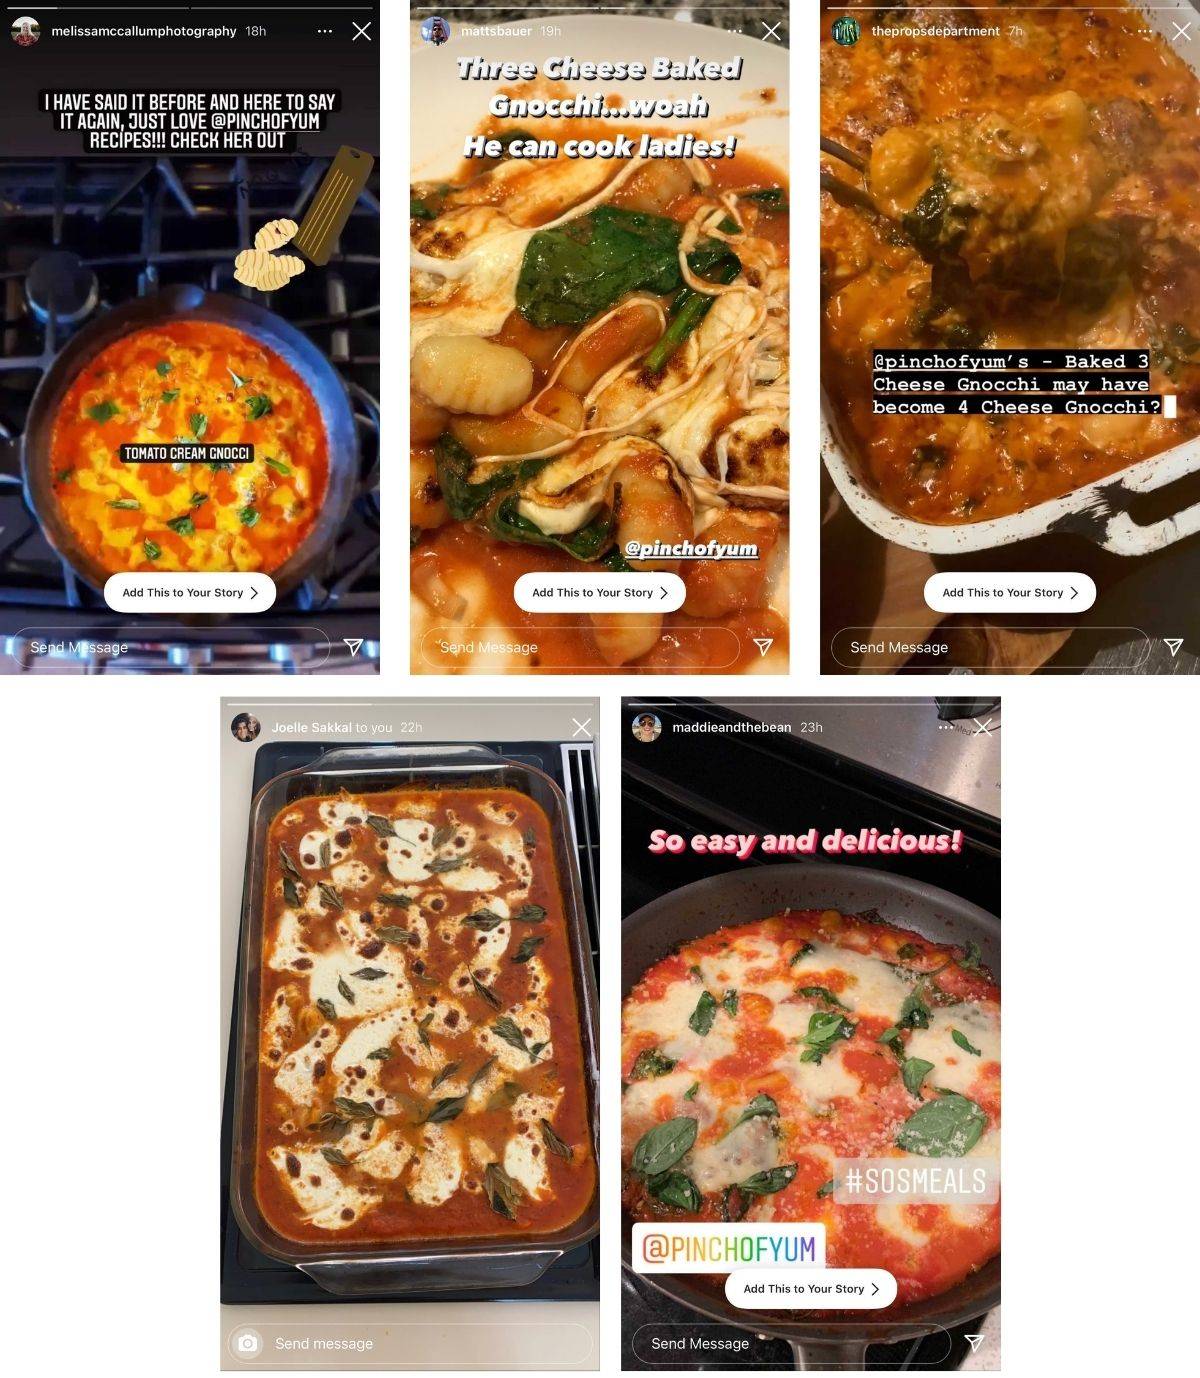 Reader images of the Three Cheese Baked Gnocchi with Spinach recipe.